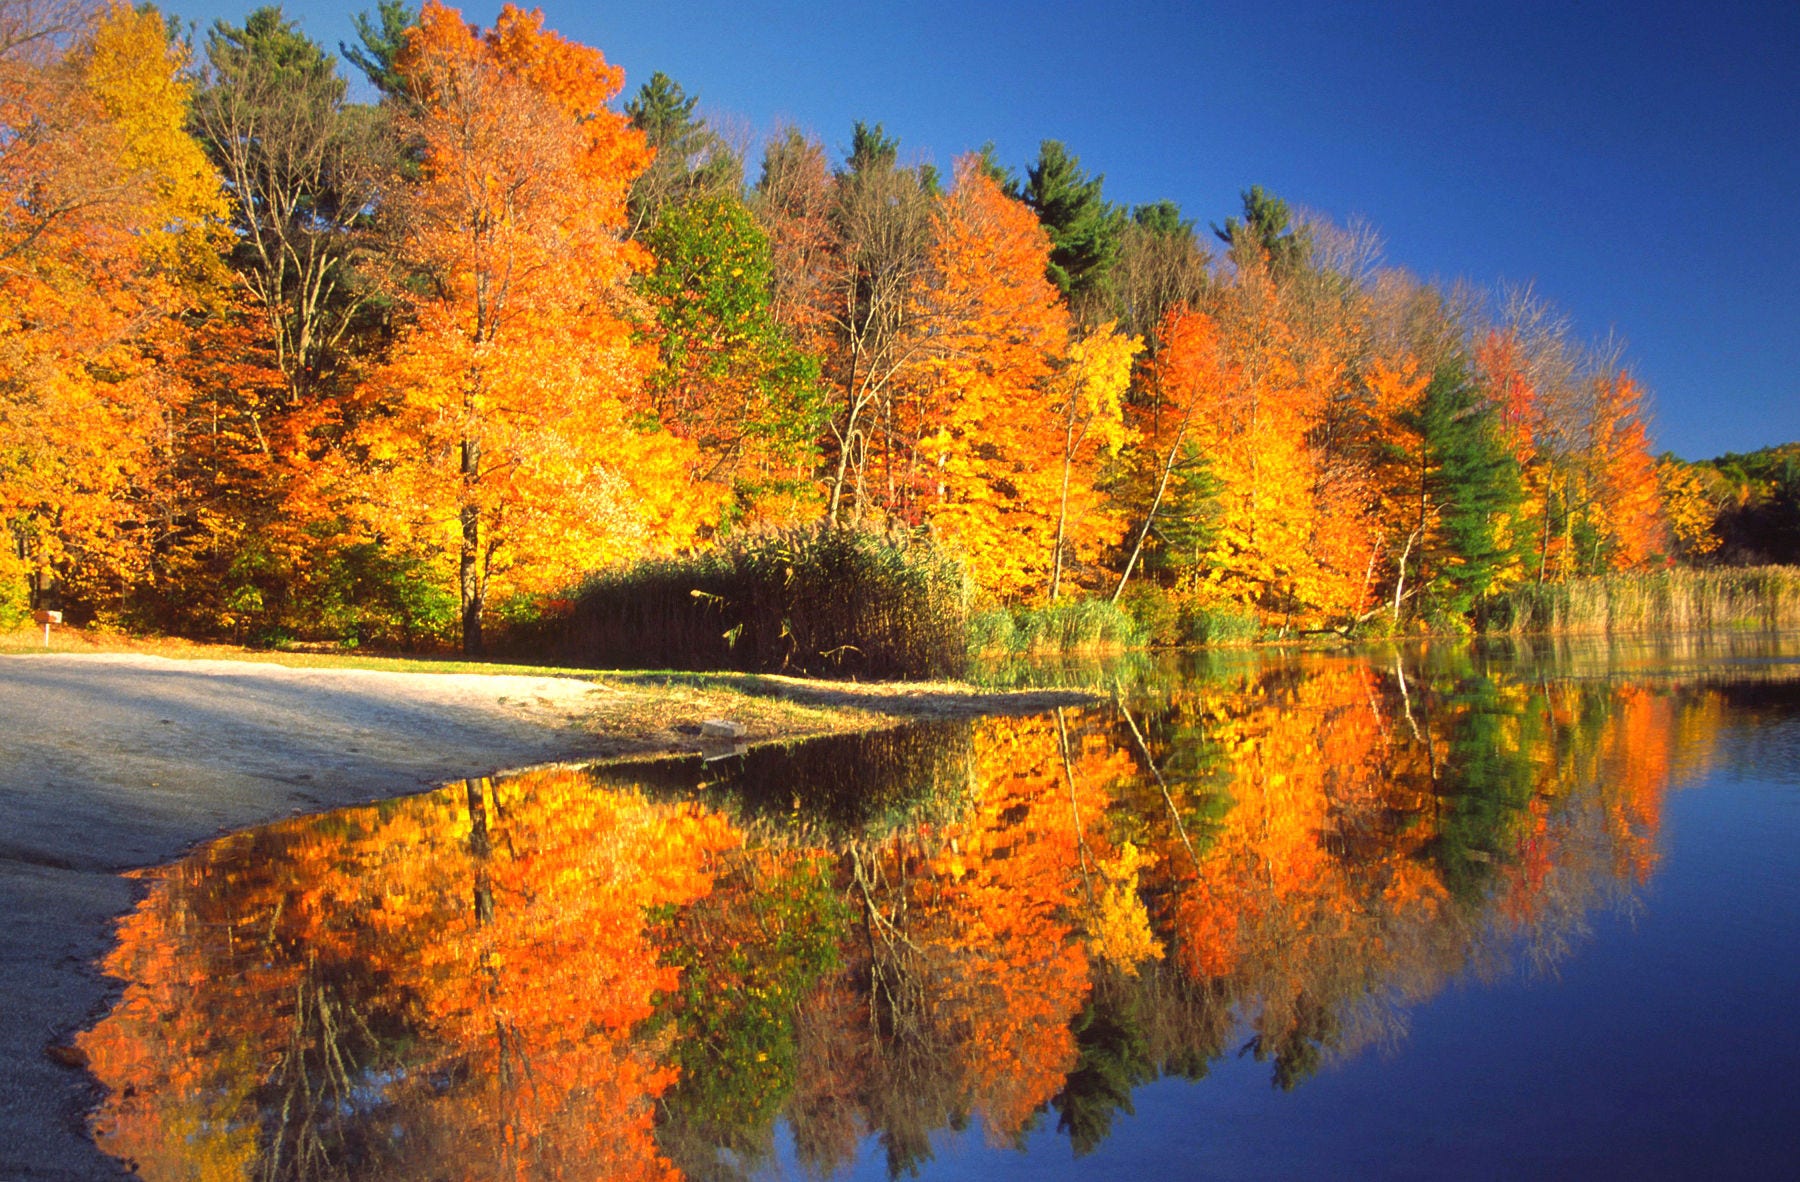 Trees with beautiful orange and yellow fall leaves next to water